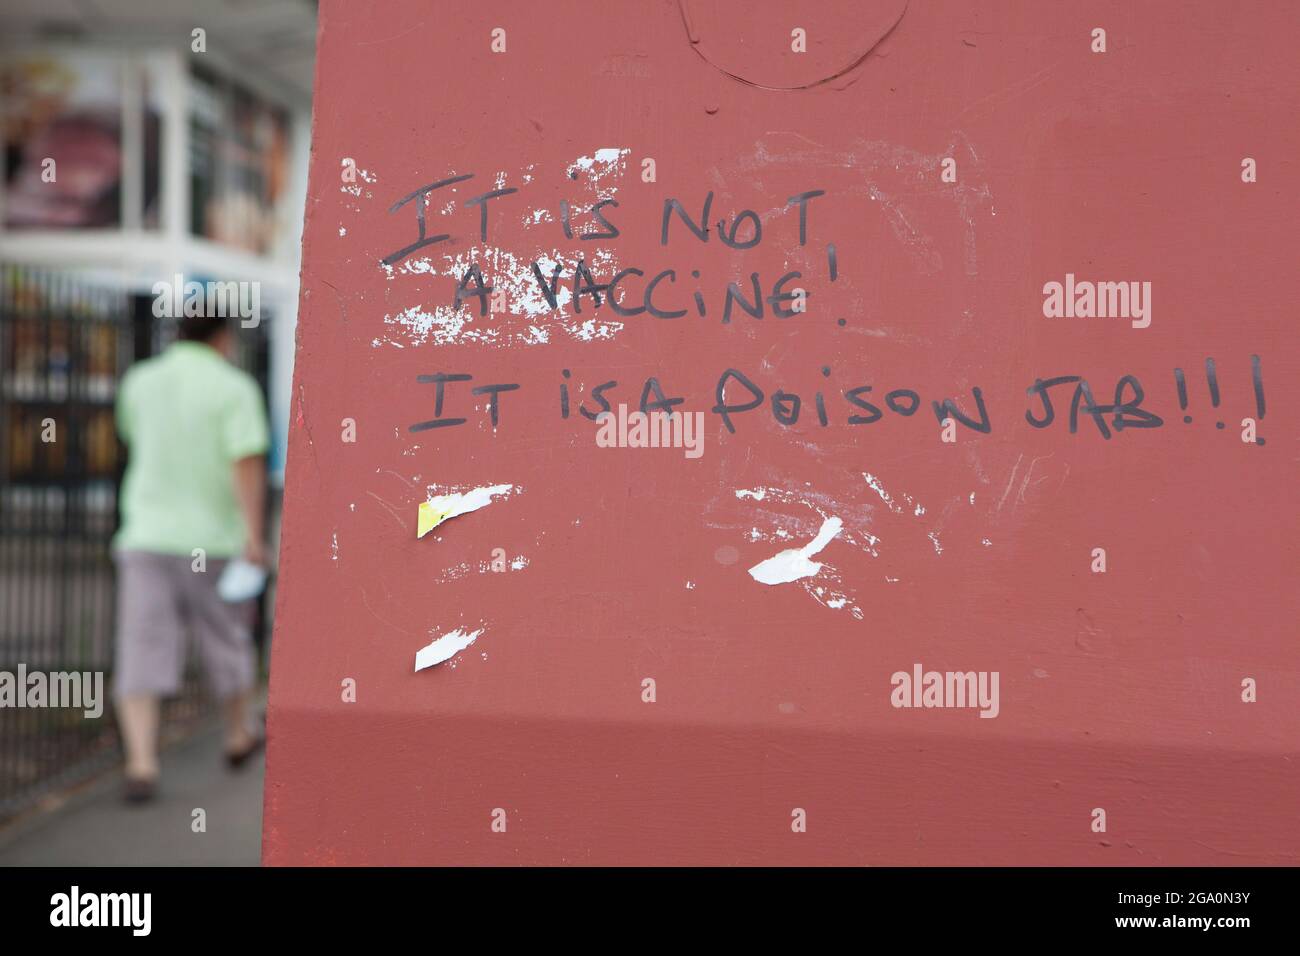 London, UK, 28 July 2021: Anti vaccine graffiti on a recycling bank in Brixton, London. An anti-vaxxer has written 'It is not a vaccine! It is a poison jab!!!' in black pen. Anna Watson/Alamy Live News Stock Photo